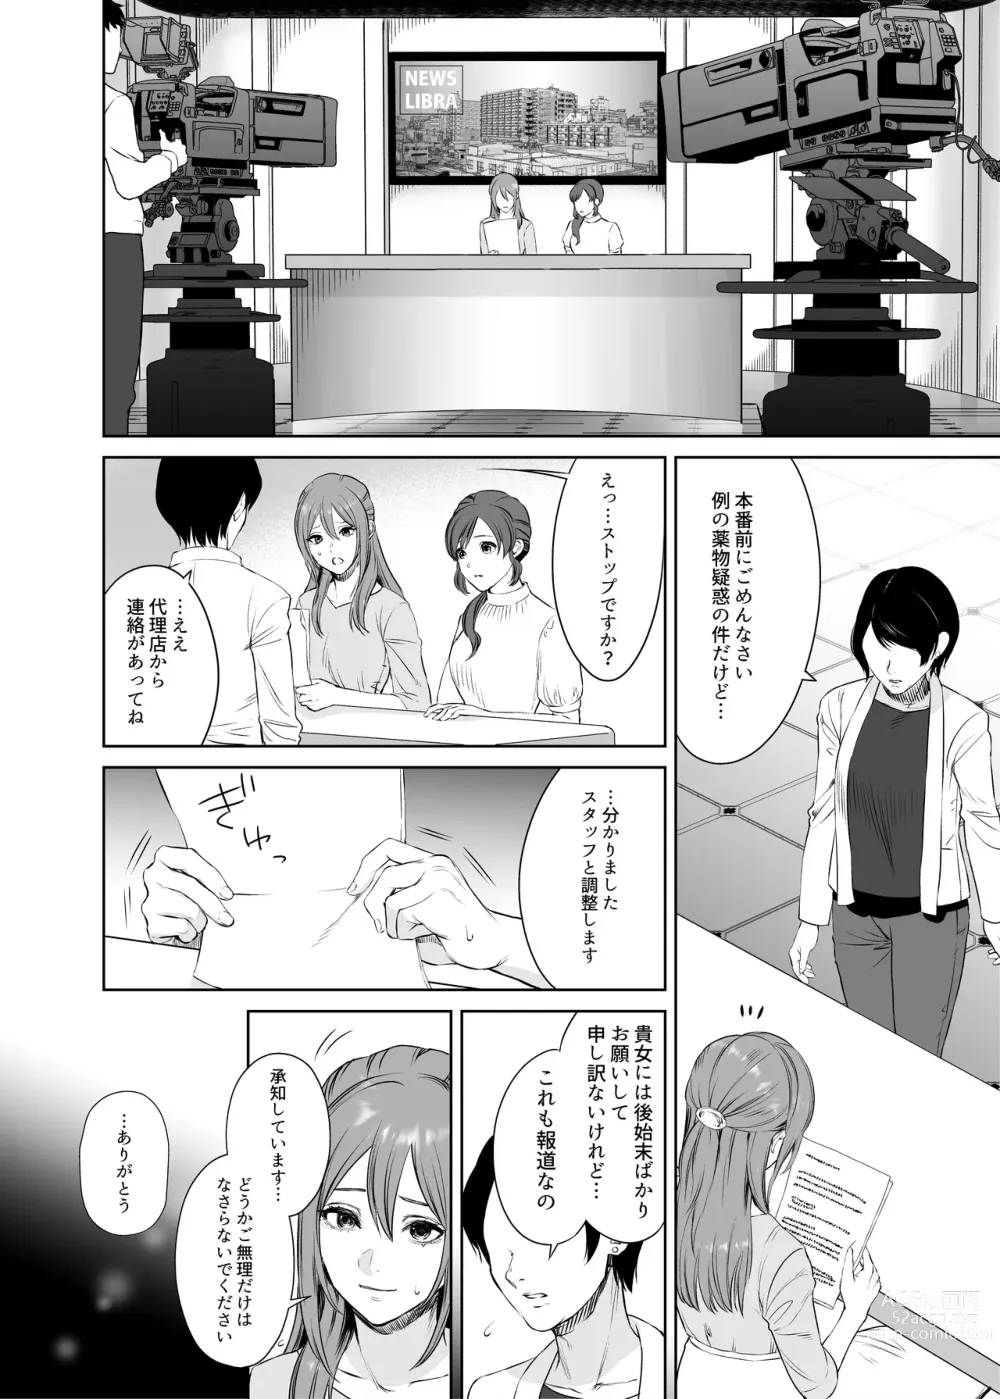 Page 4 of doujinshi LesFes Co Candid Reporting Vol. 004